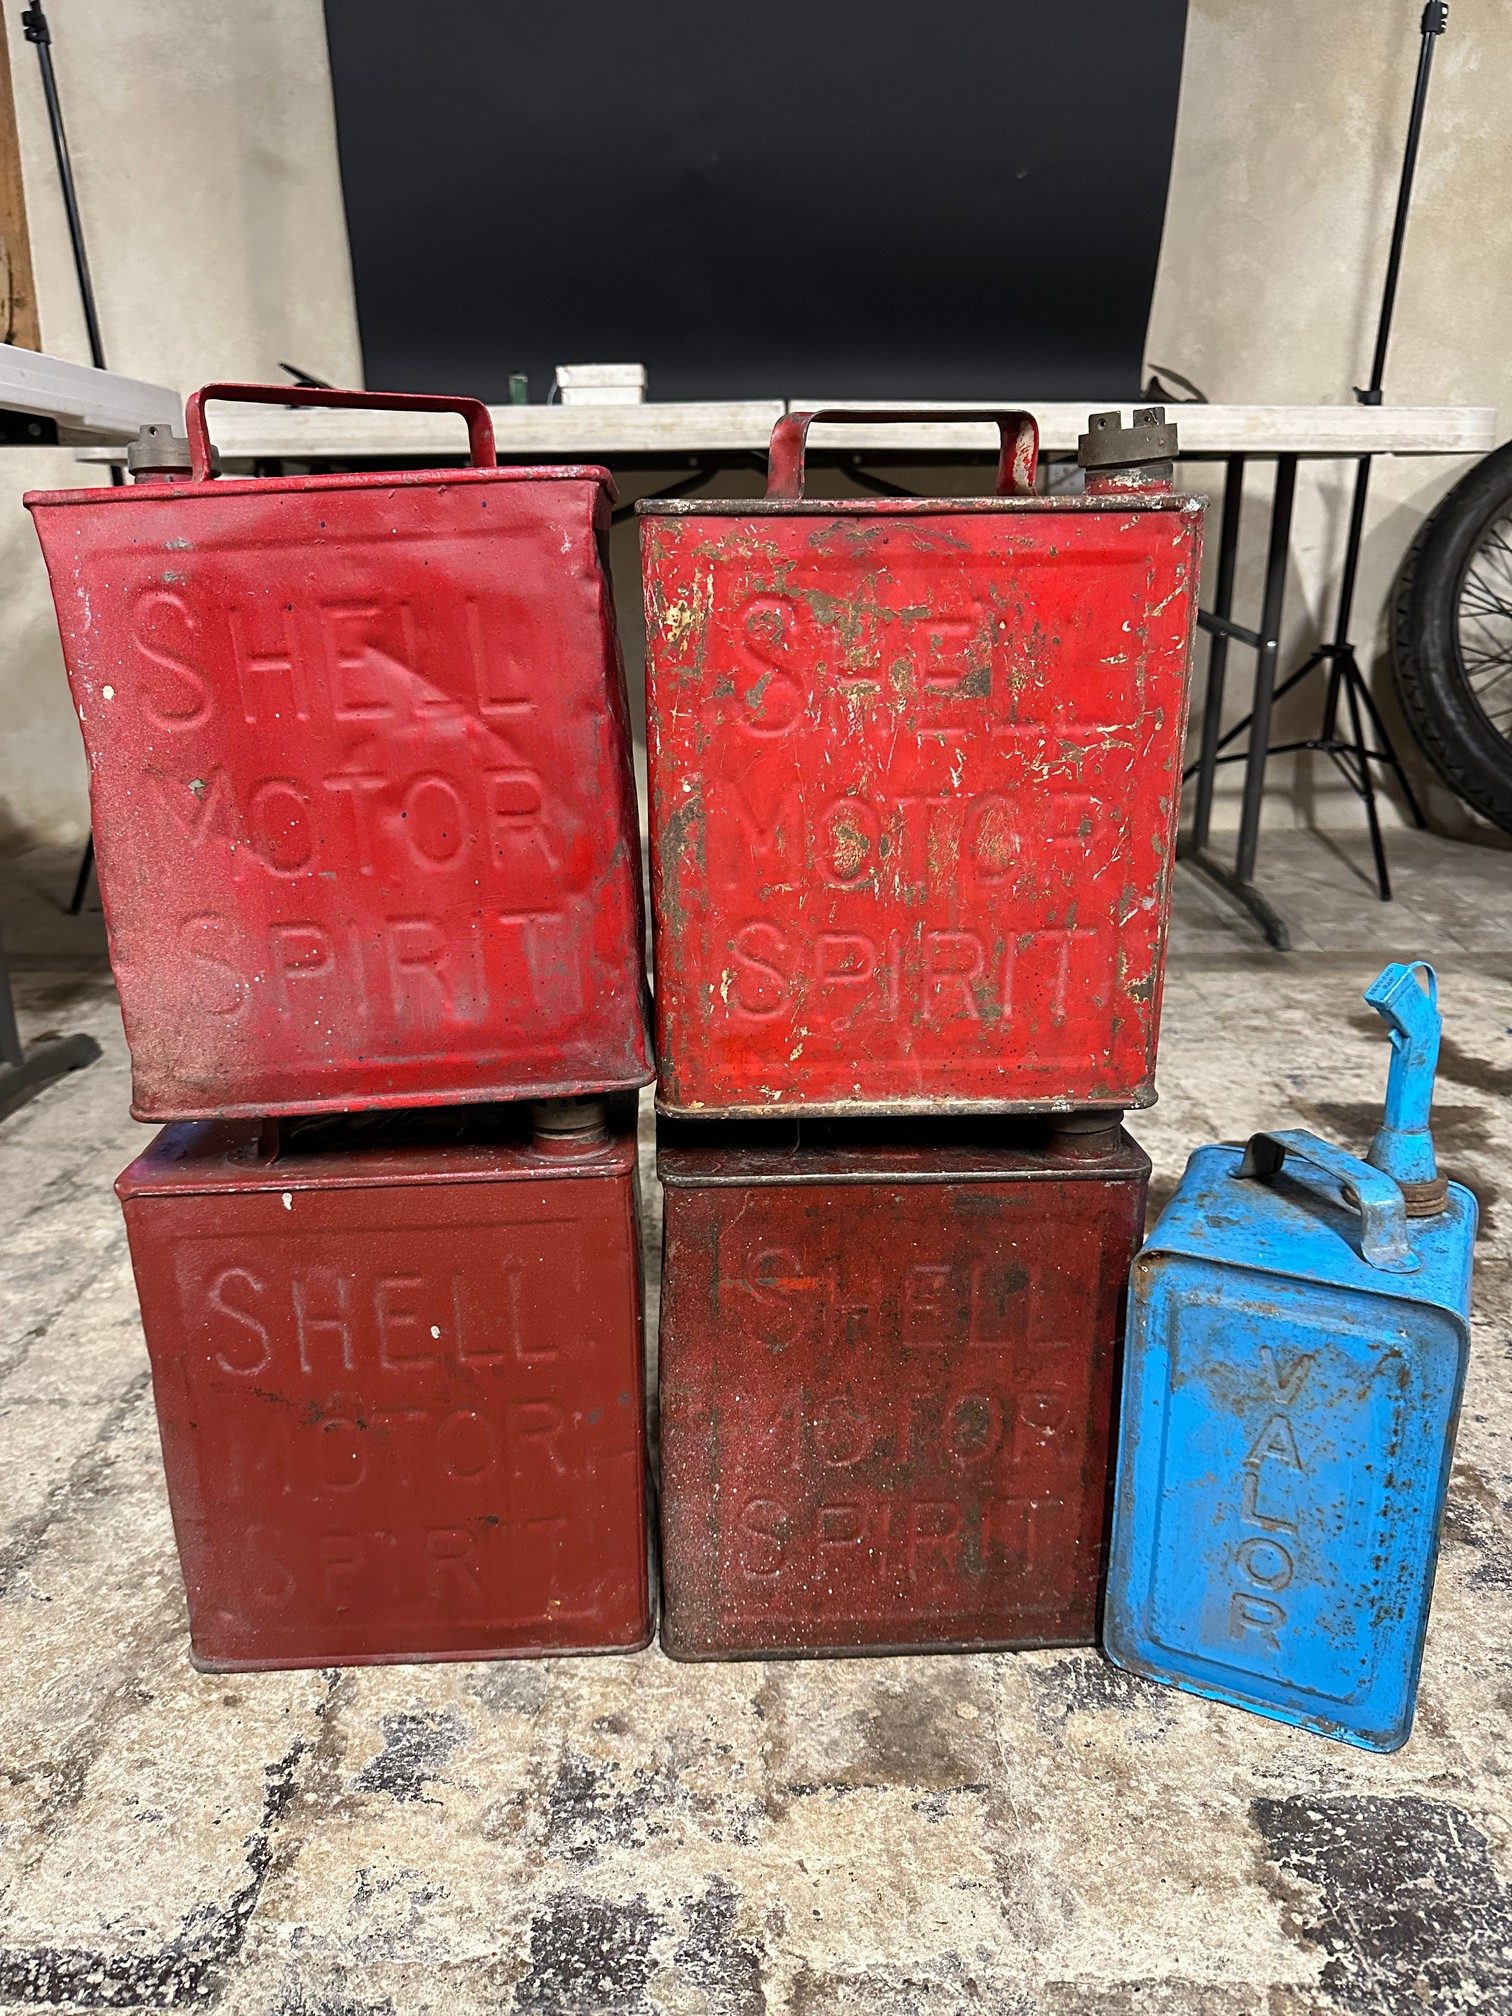 Four Shell two gallon petrol cans and a Valor paraffin can.